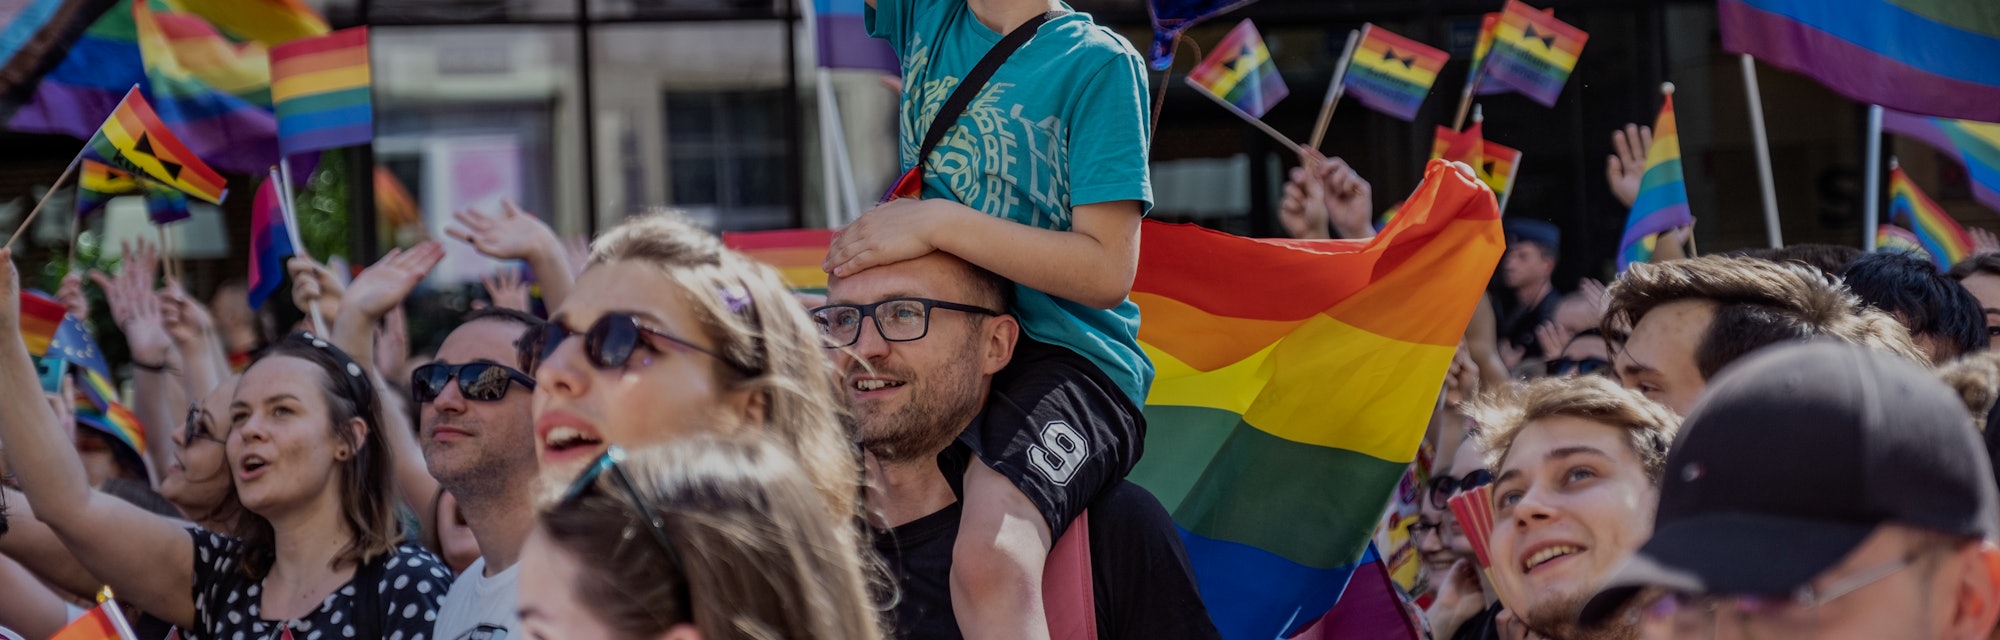 WROCLAW, POLAND - 2022/06/11: A young boy carried on his father shoulders waves a pride flag during ...